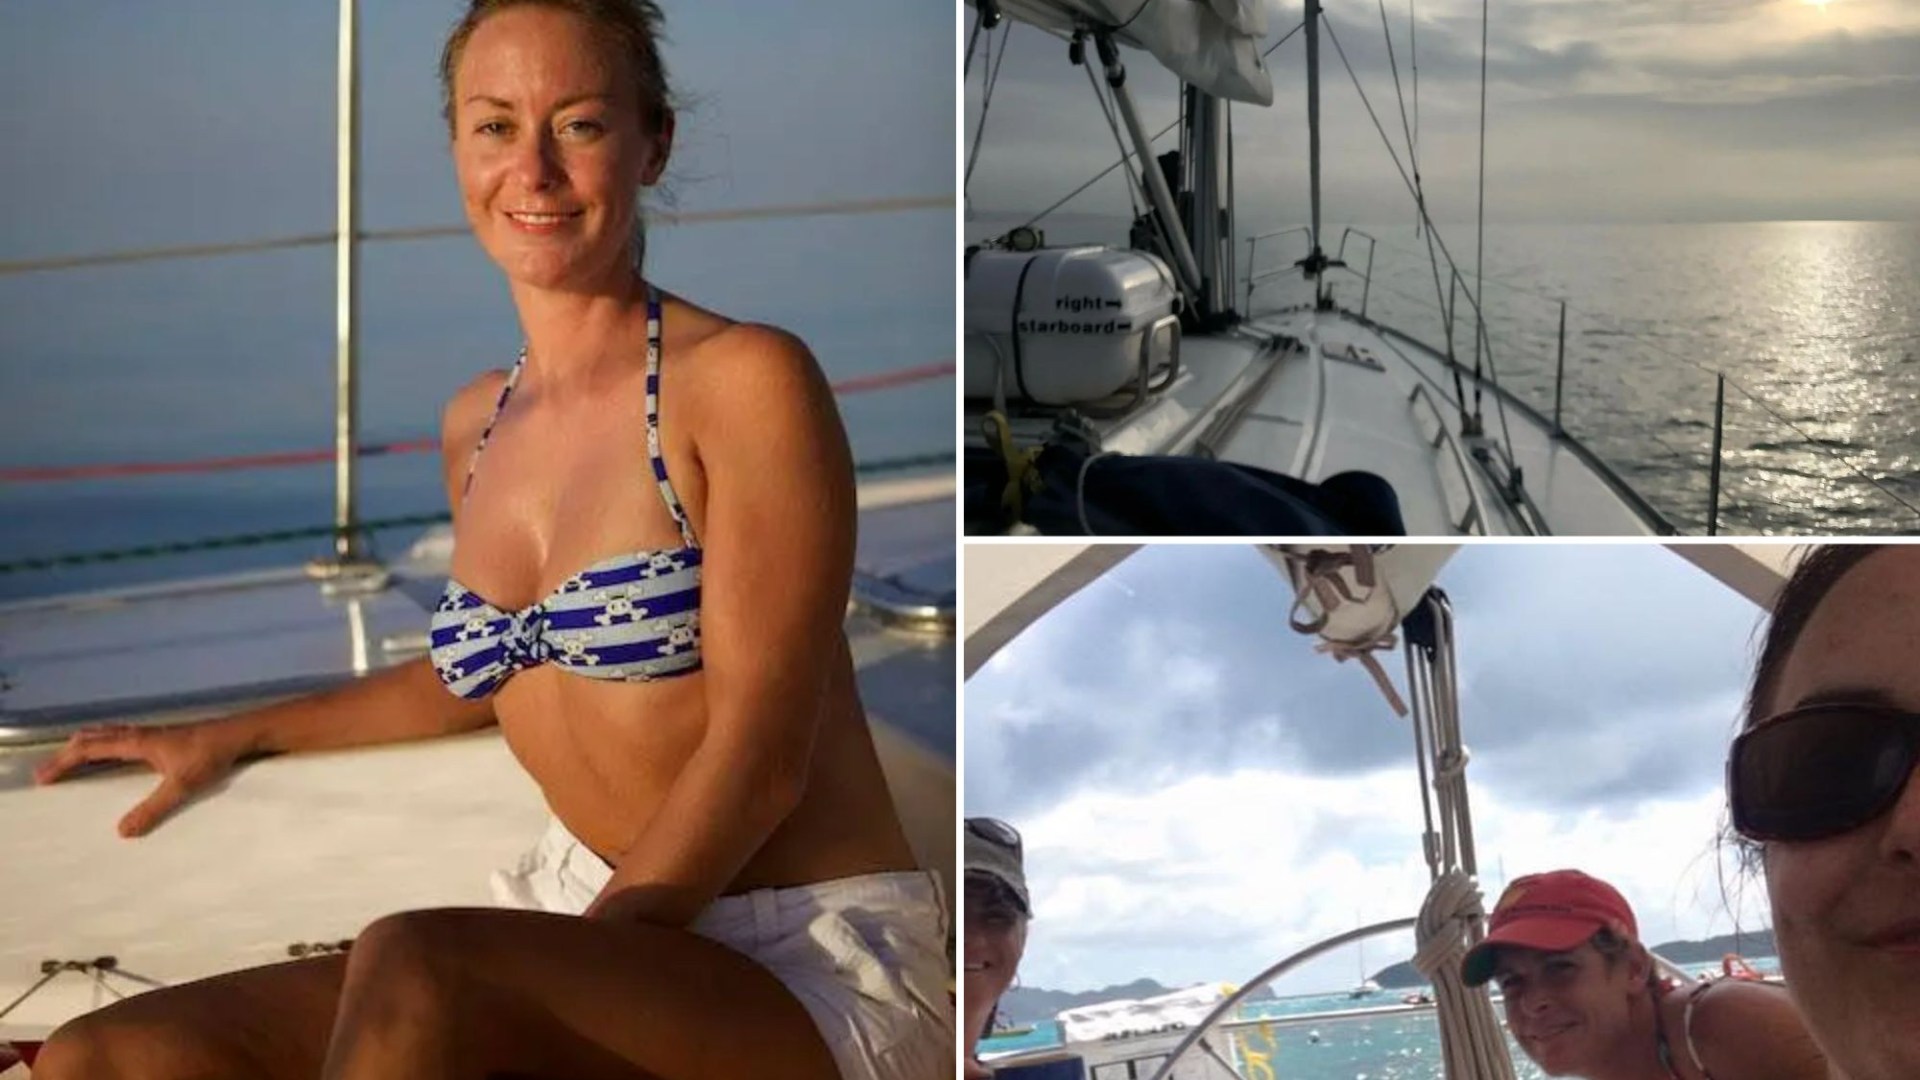 I gave up normal life to live on boat with man I’d never met – it was magic until dangerous reality of life at sea hit [Video]